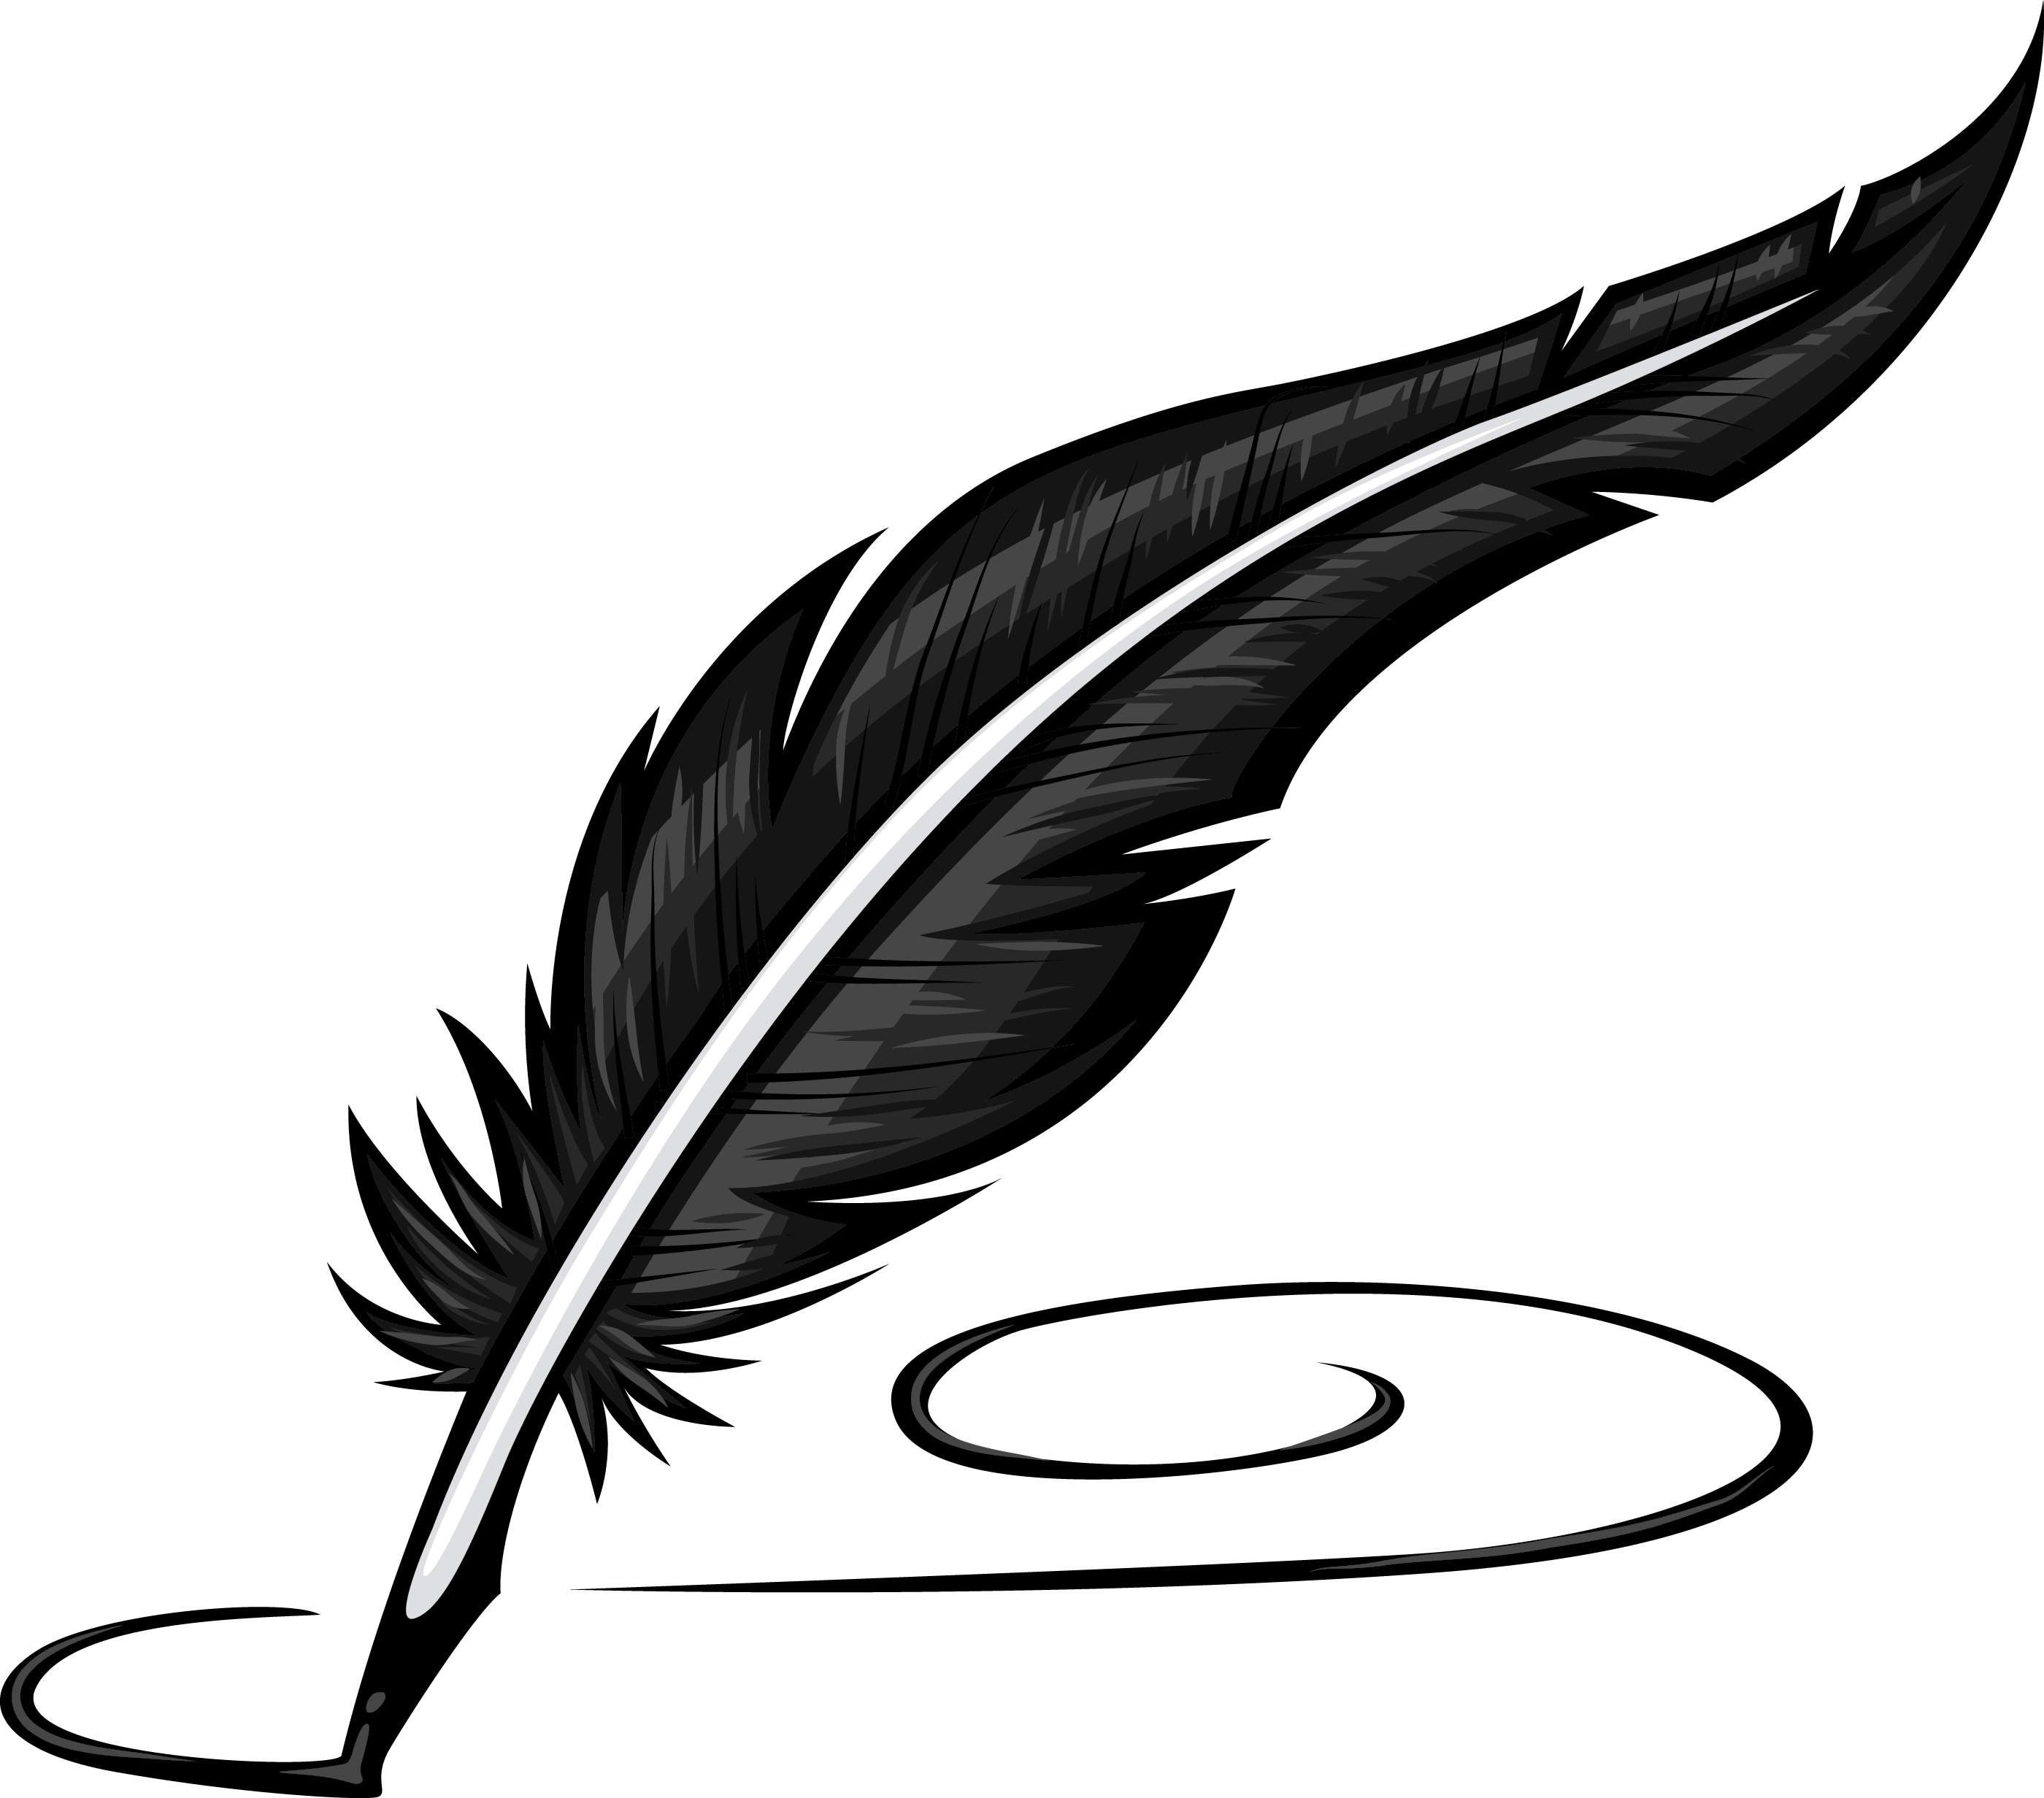 Ink and feather pen clipart